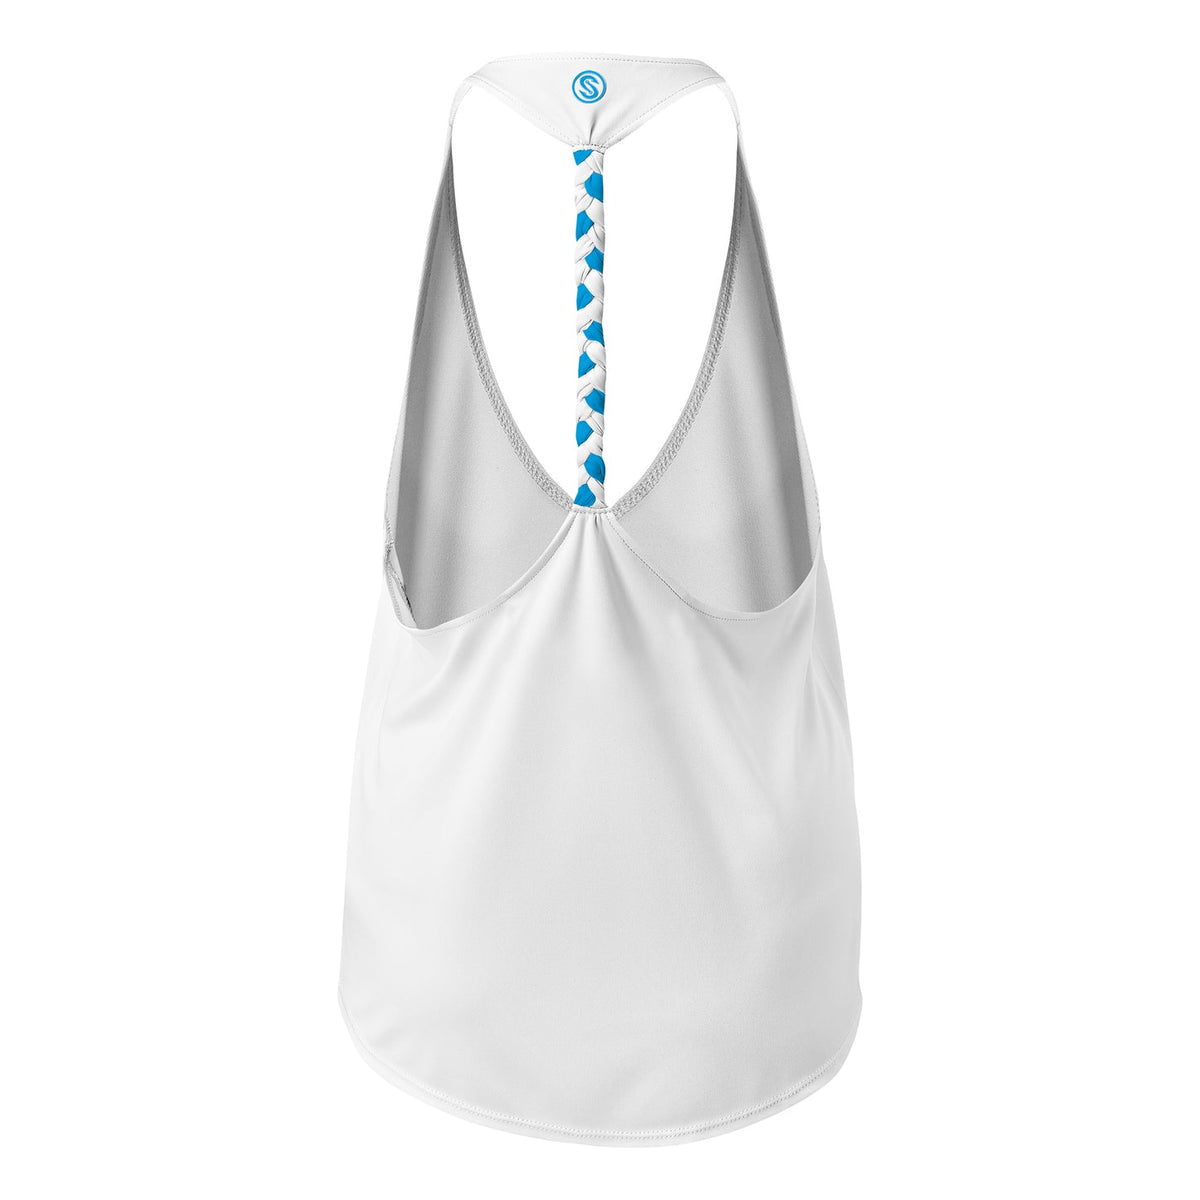 SCALES PRO Fly Sail Womens Performance Tank